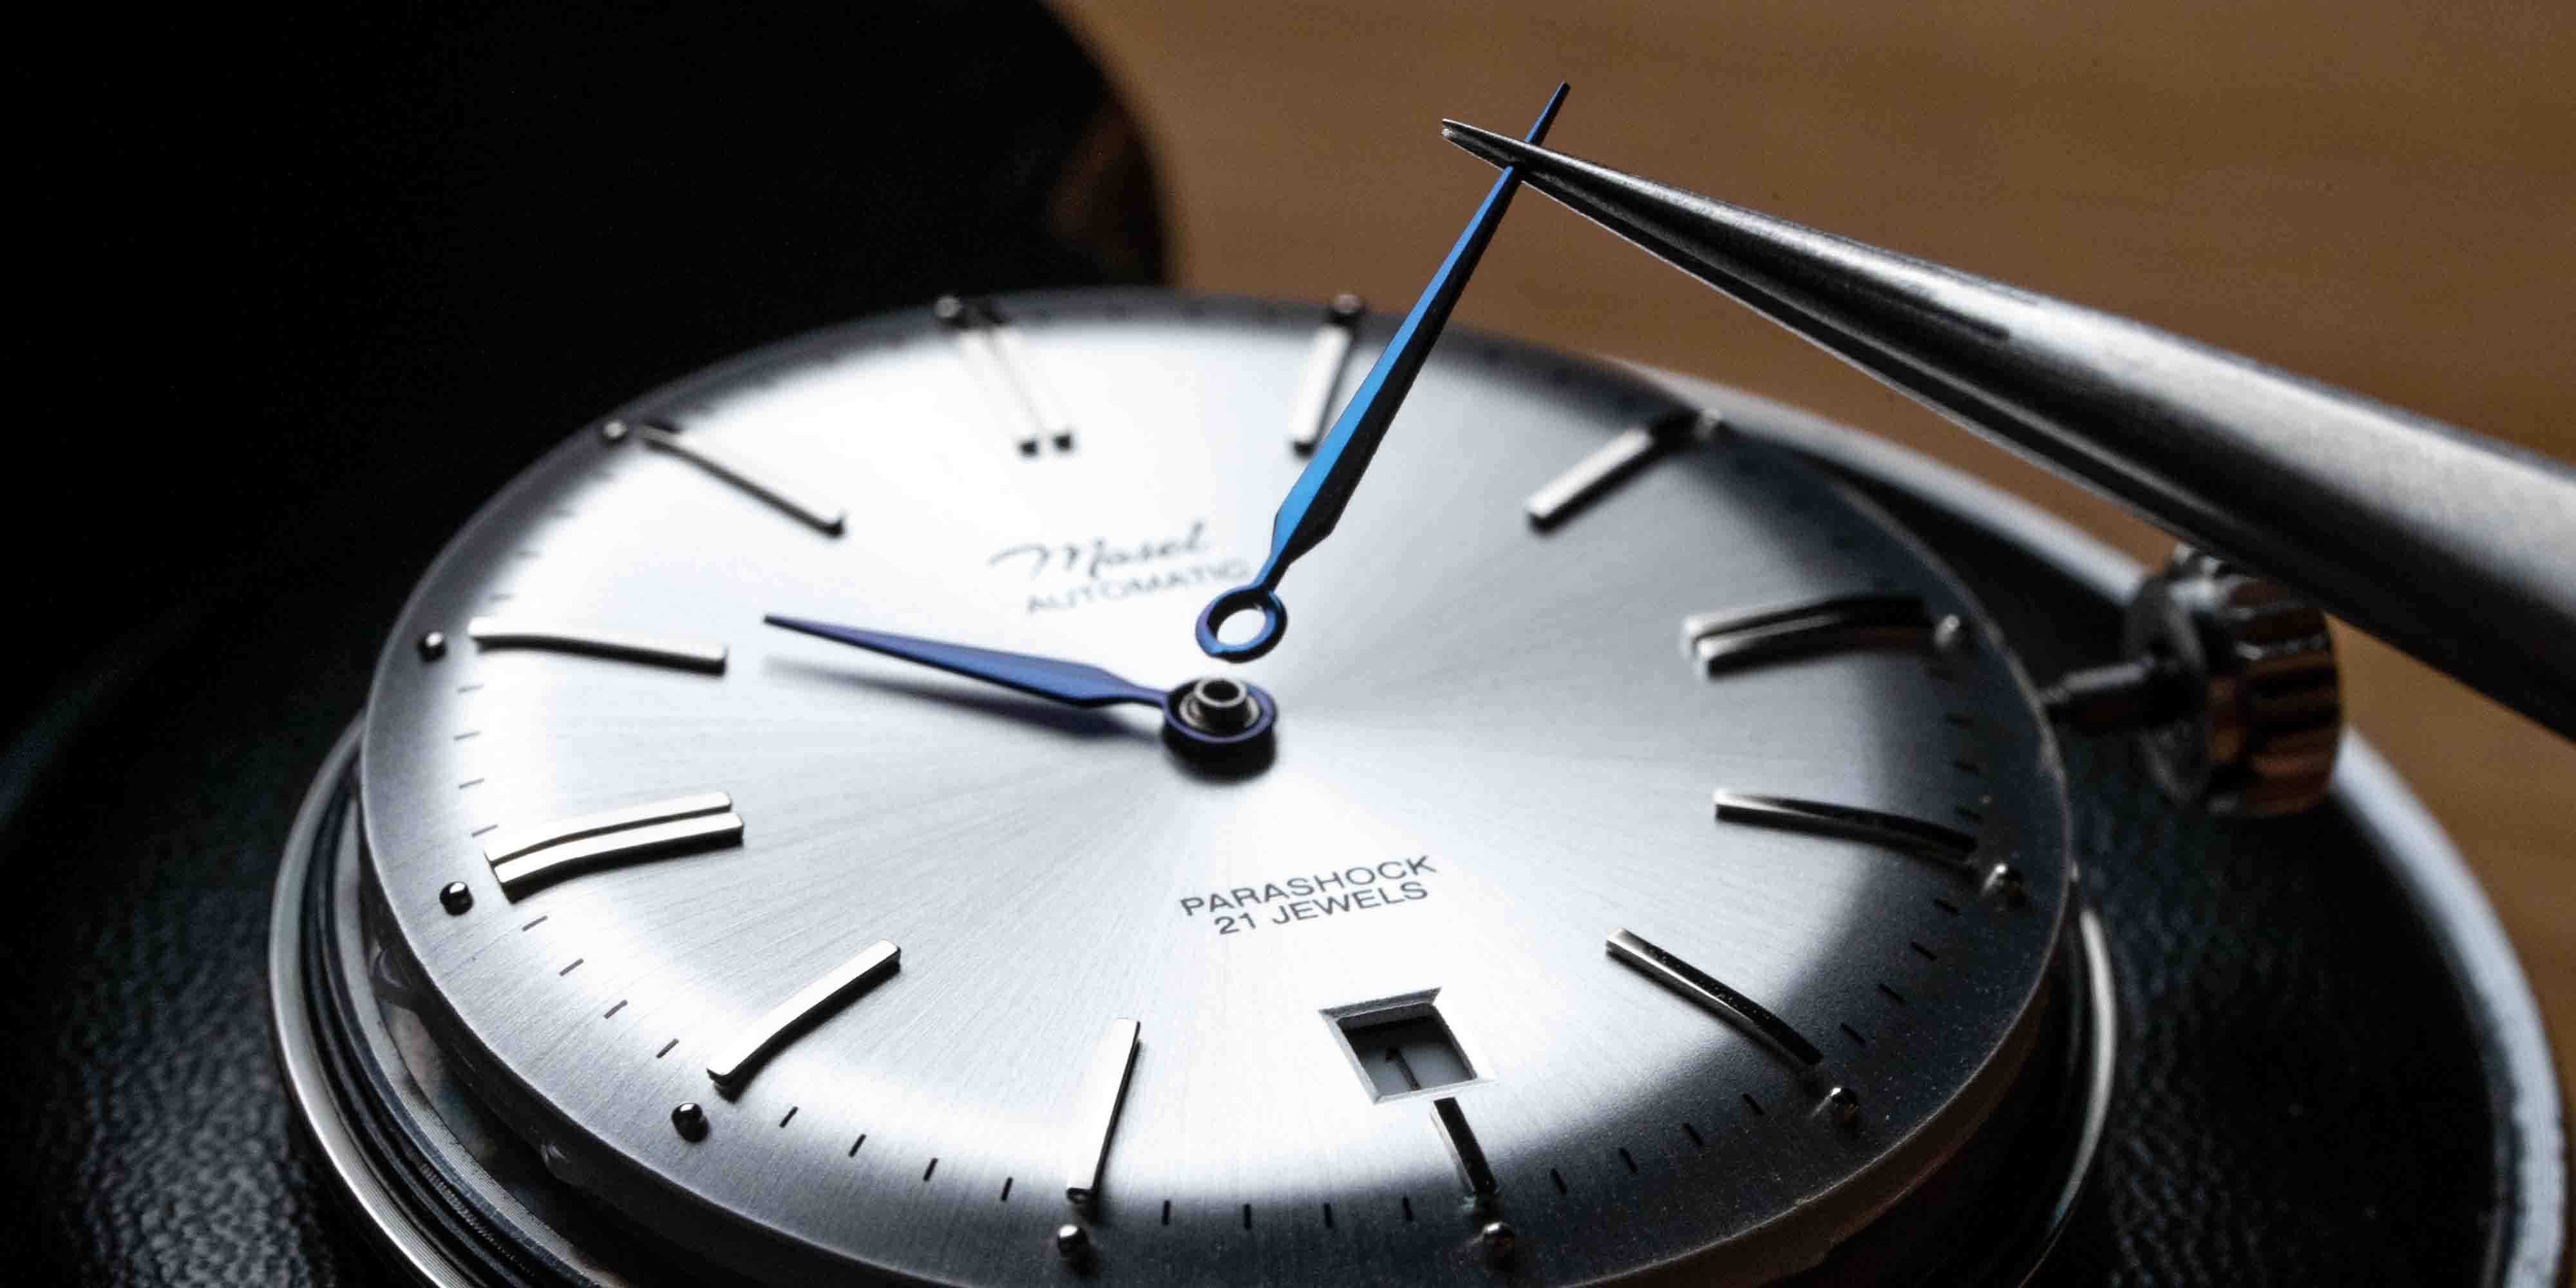 Install your steel blue hands onto your very own vintage watch